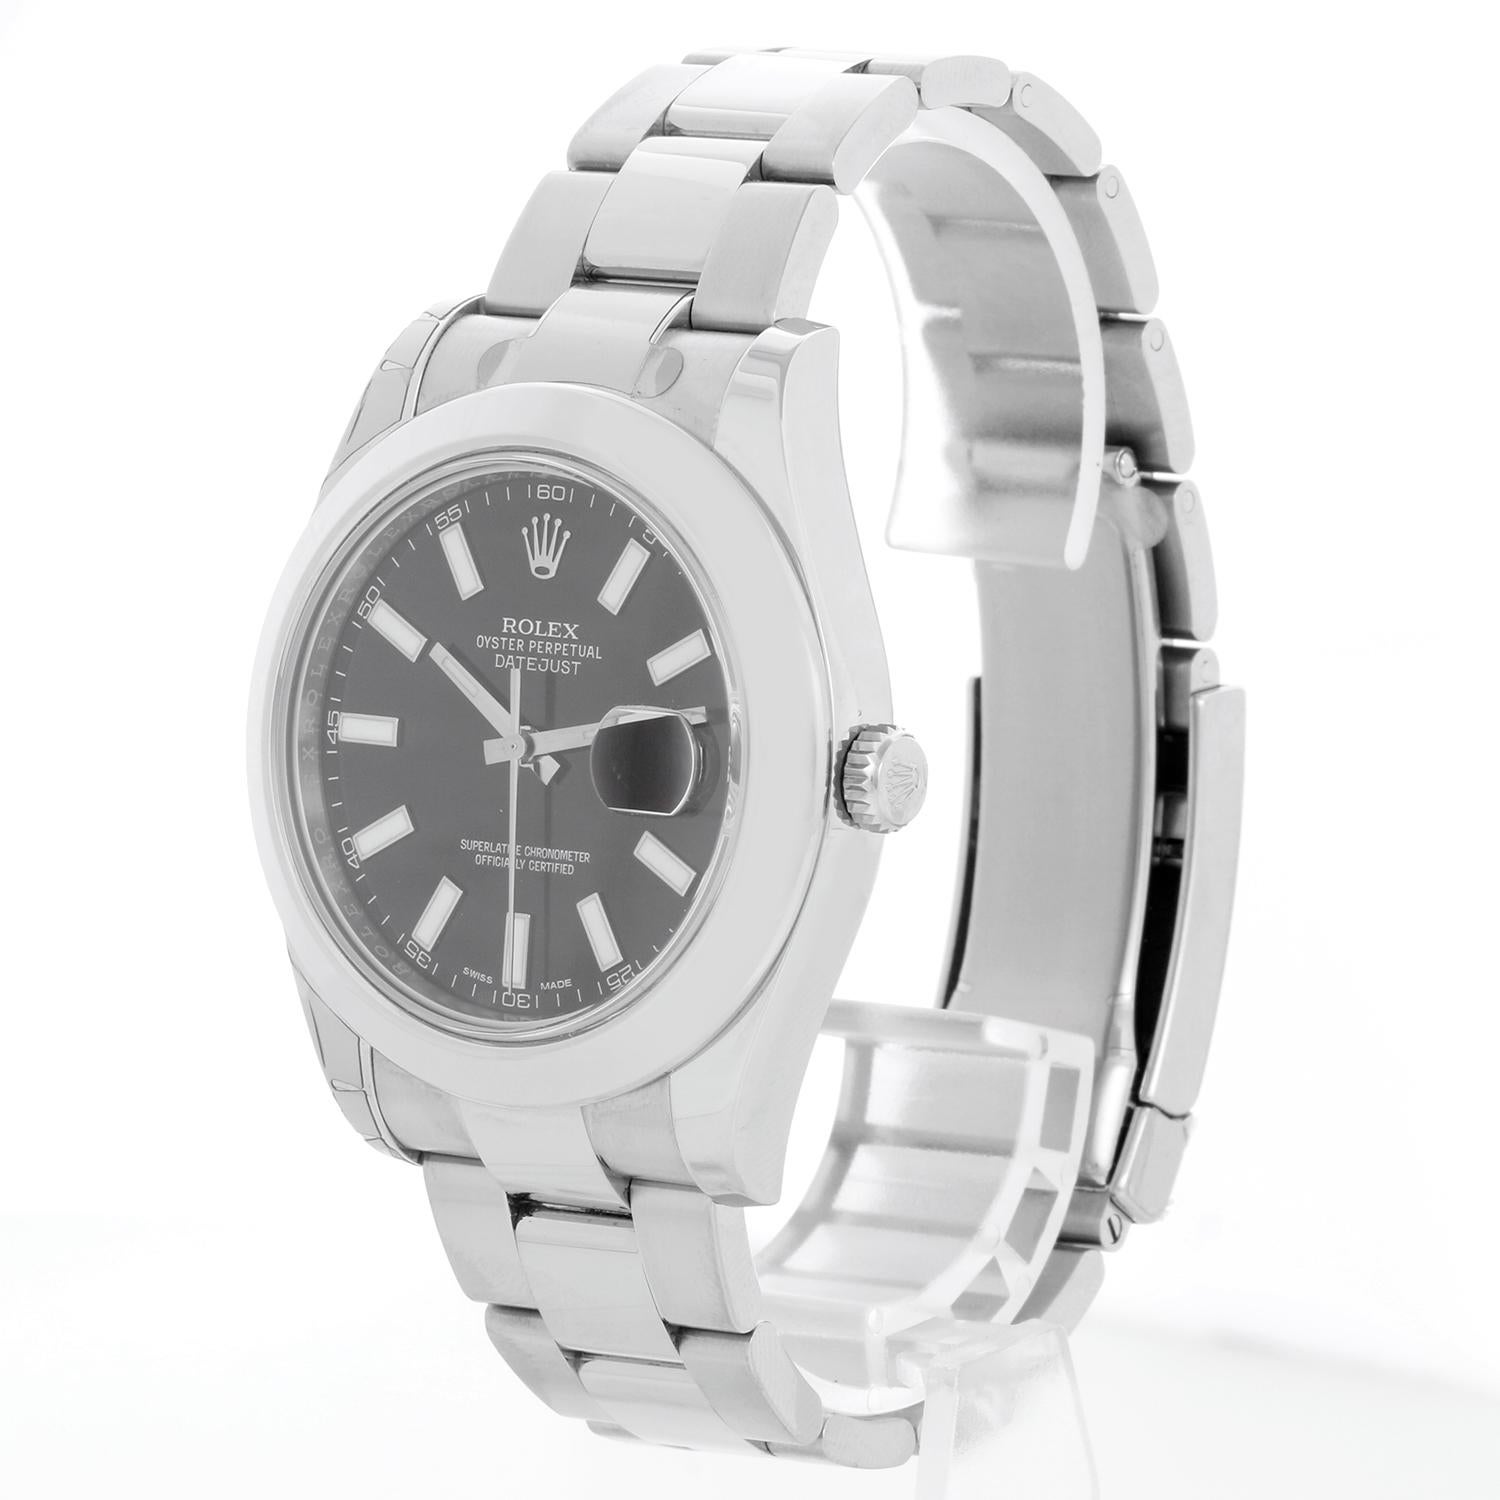 Rolex Datejust II Men's 41mm Stainless Steel Watch 116300 - Automatic winding, sapphire crystal,. Stainless steel case with smooth bezel (41mm diameter). Black dial with stick hour markers. Stainless steel Oyster bracelet with flip lock clasp.